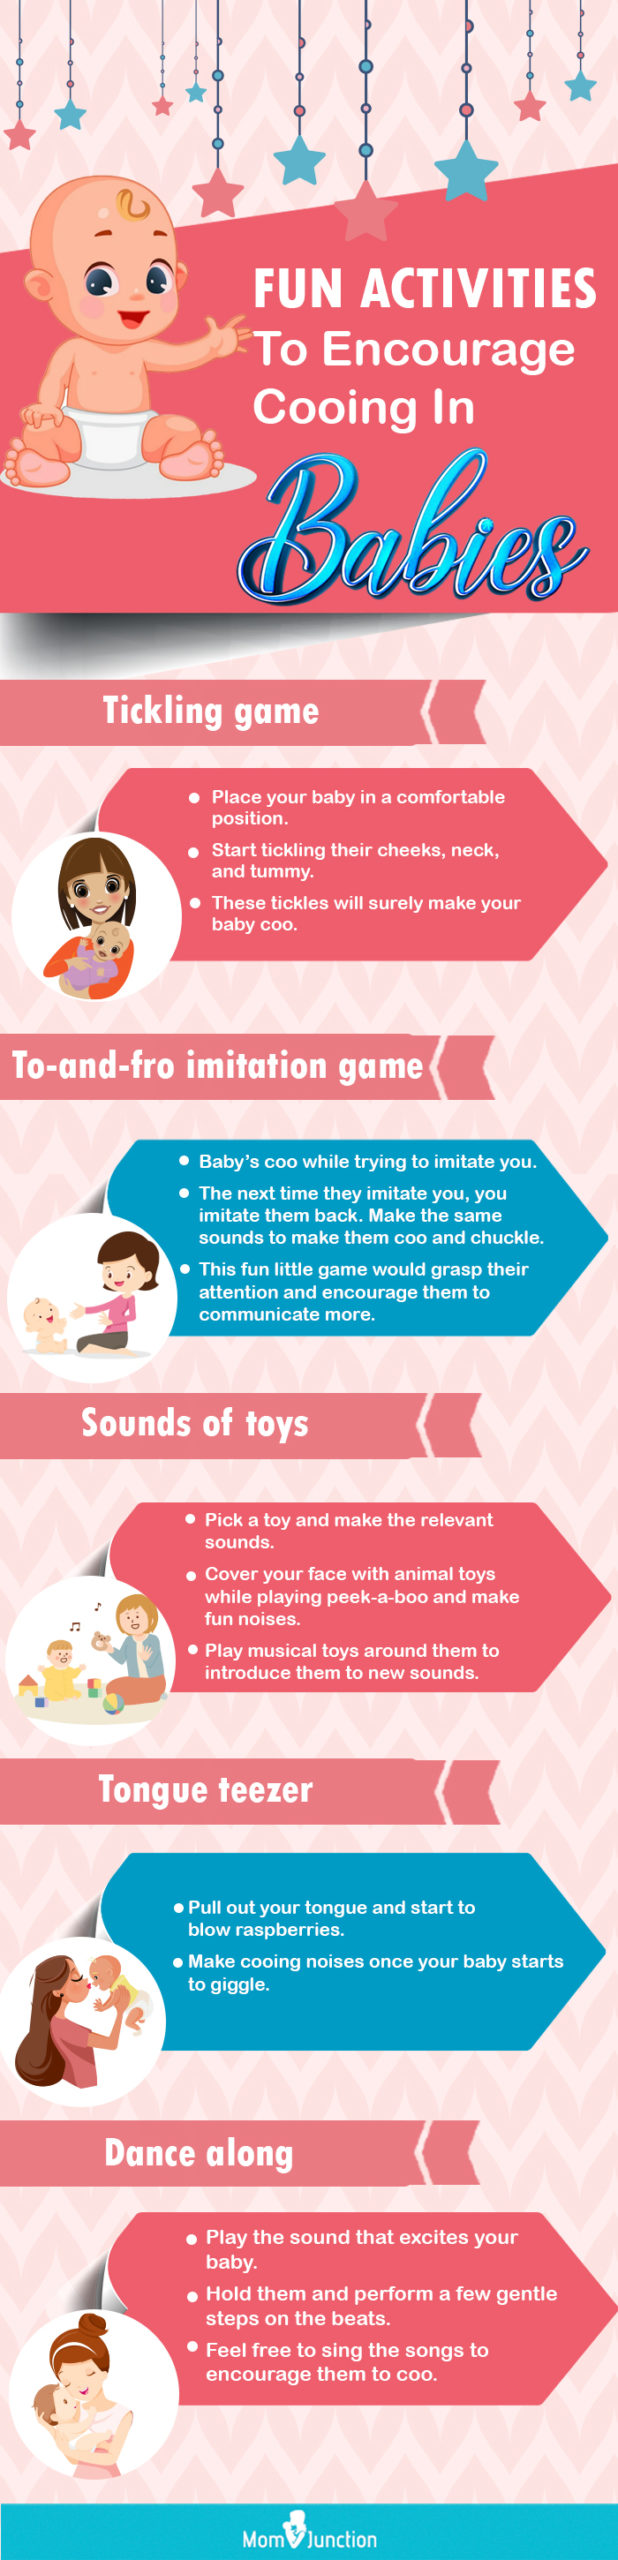 promote cooing in babies [infographic]